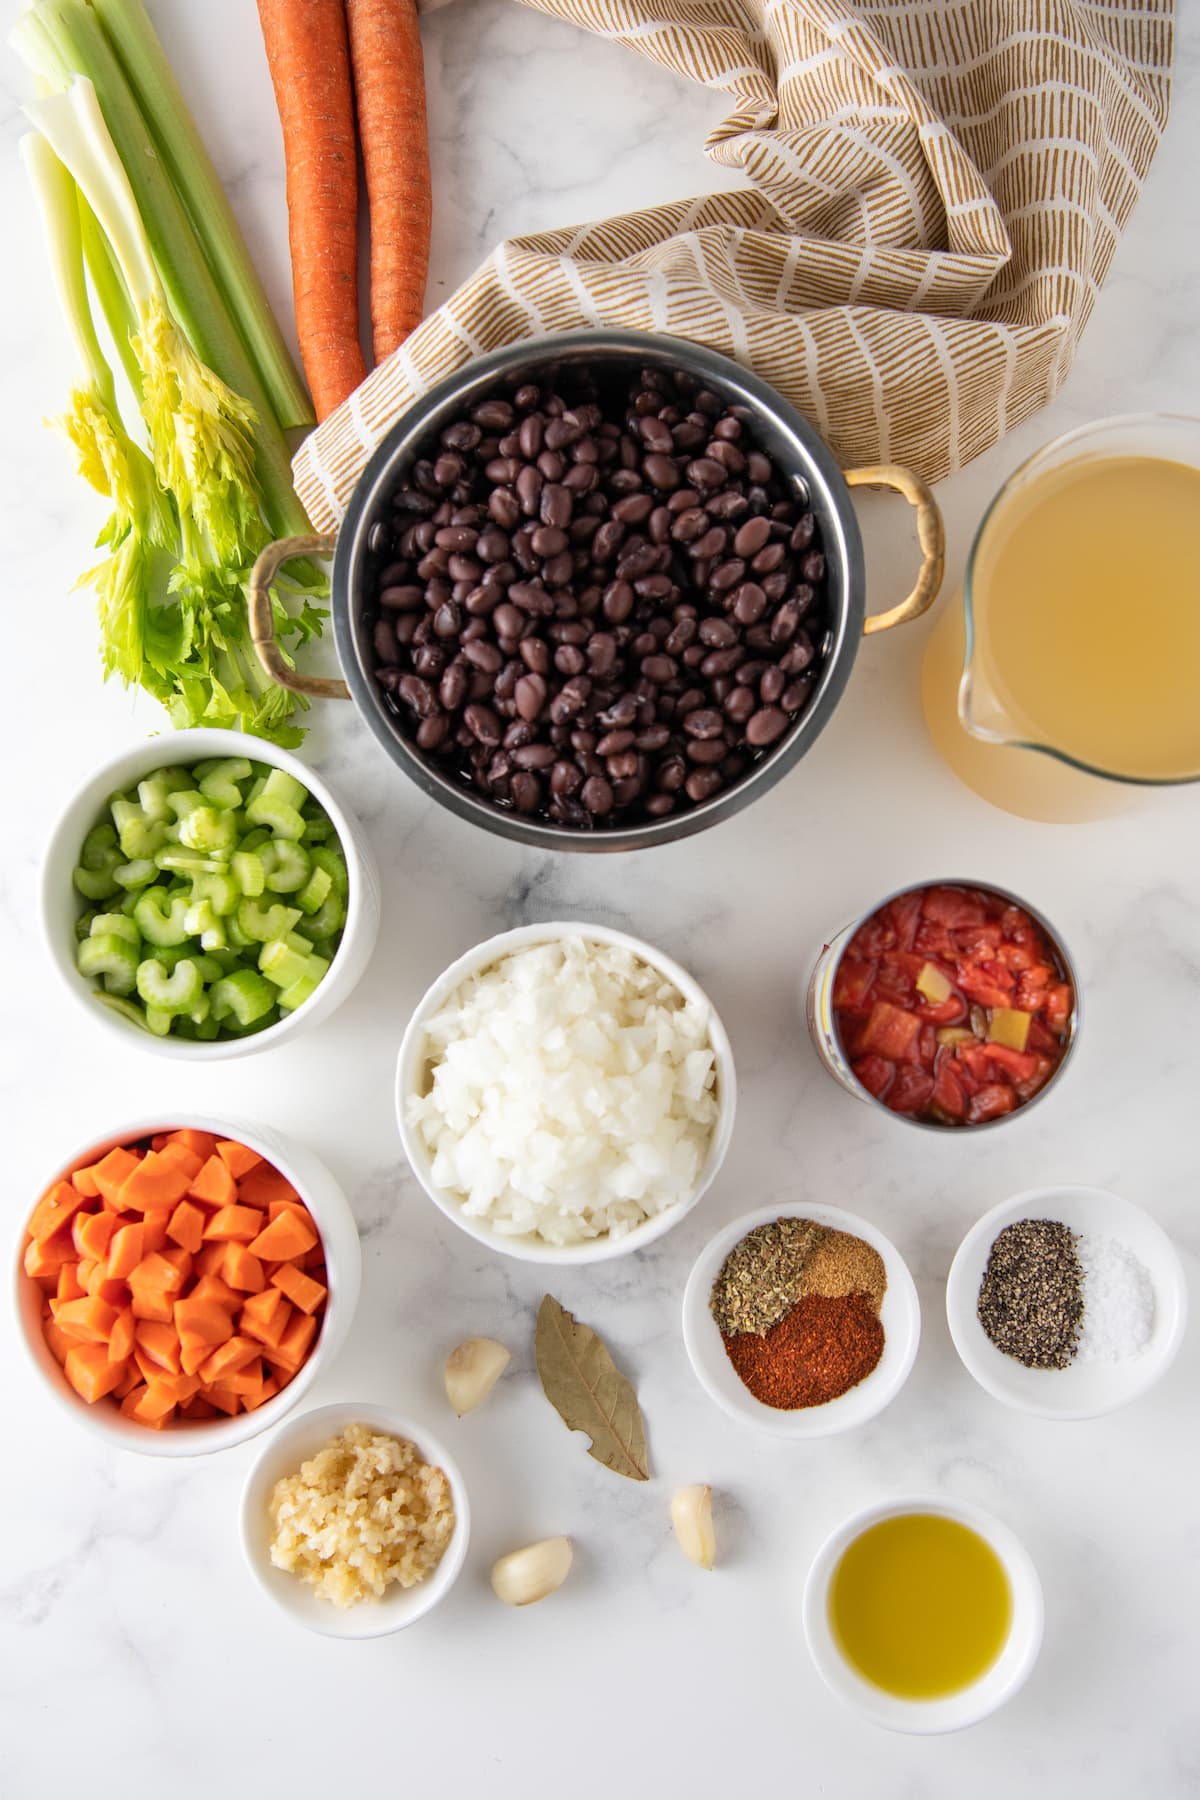 various ingredients to make carrot black bean soup like black beans, diced vegetables, and seasonings in different prep bowls